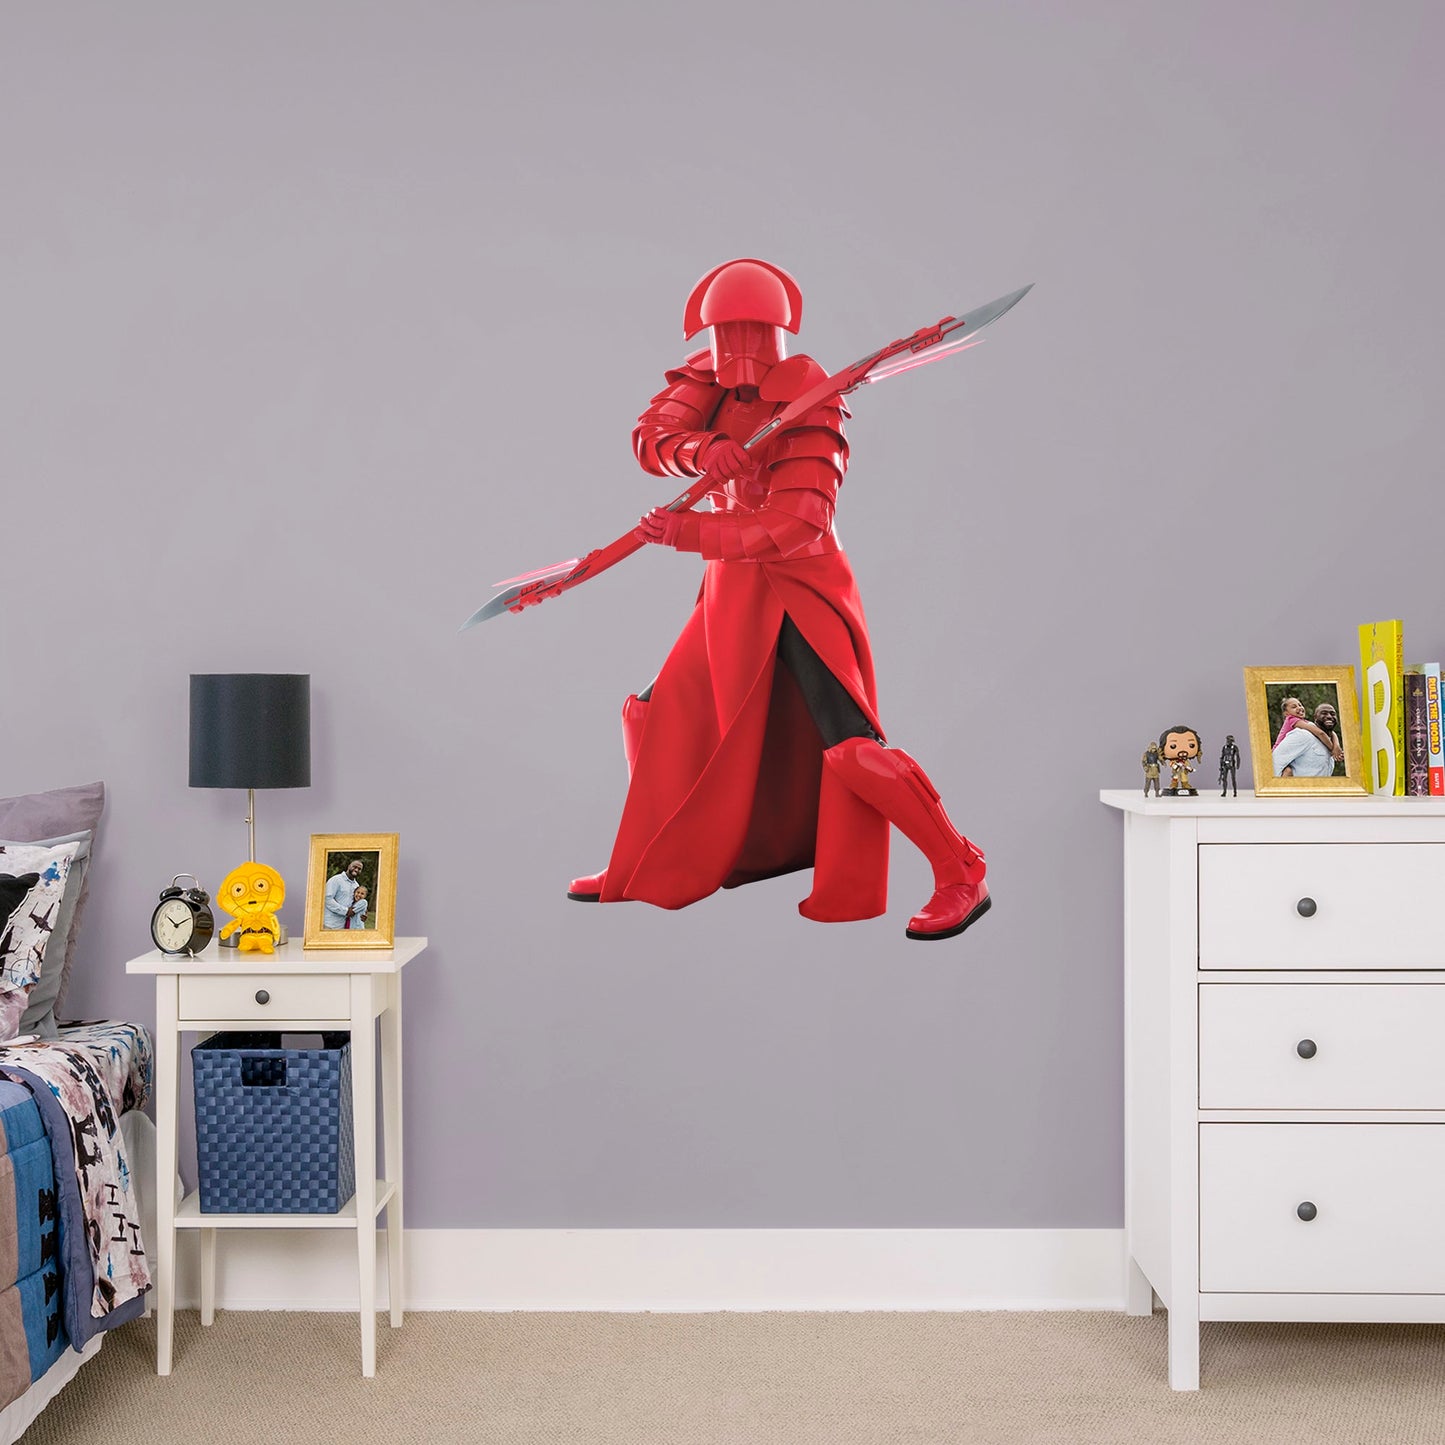 Giant Character + 2 Decals (41"W x 48"H)